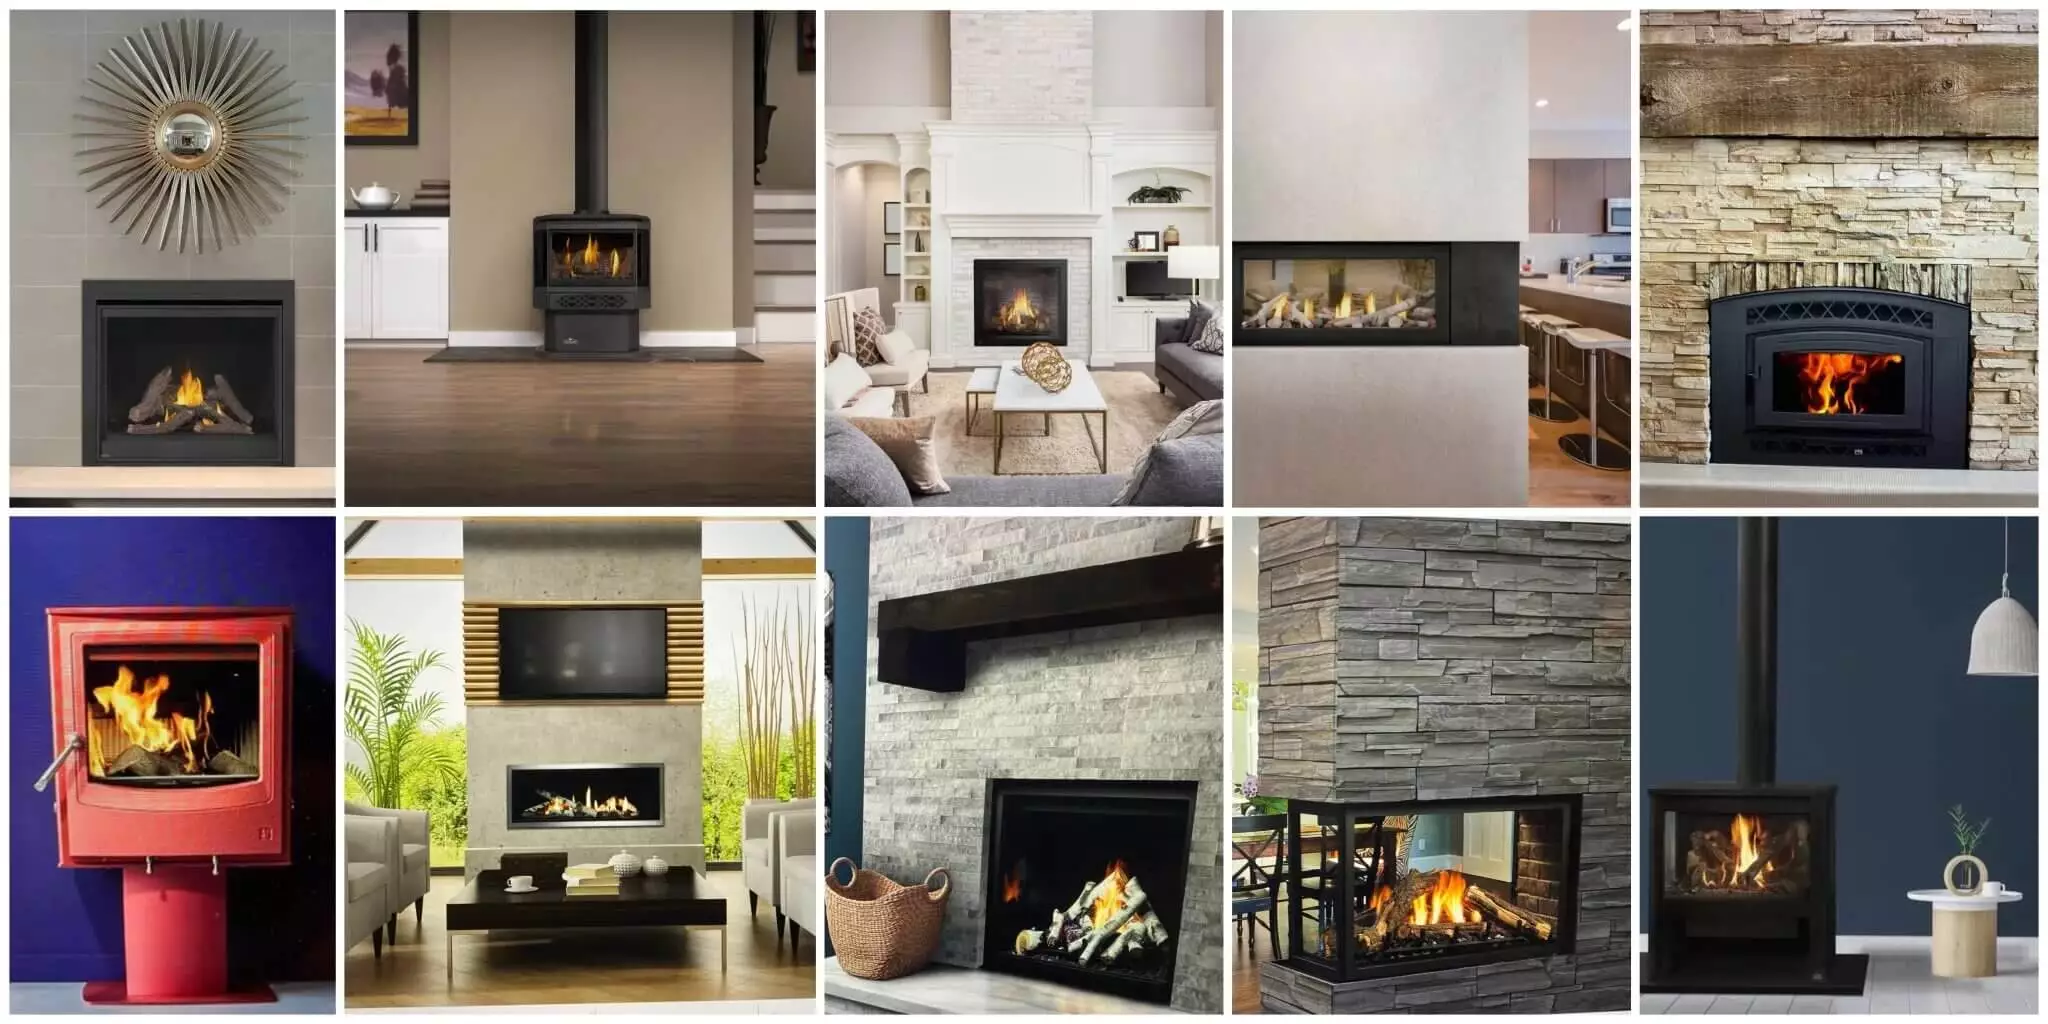 Wood fireplace inserts, wood stoves, gas fireplace inserts, gas stoves and gas log sets by Mr Chimney